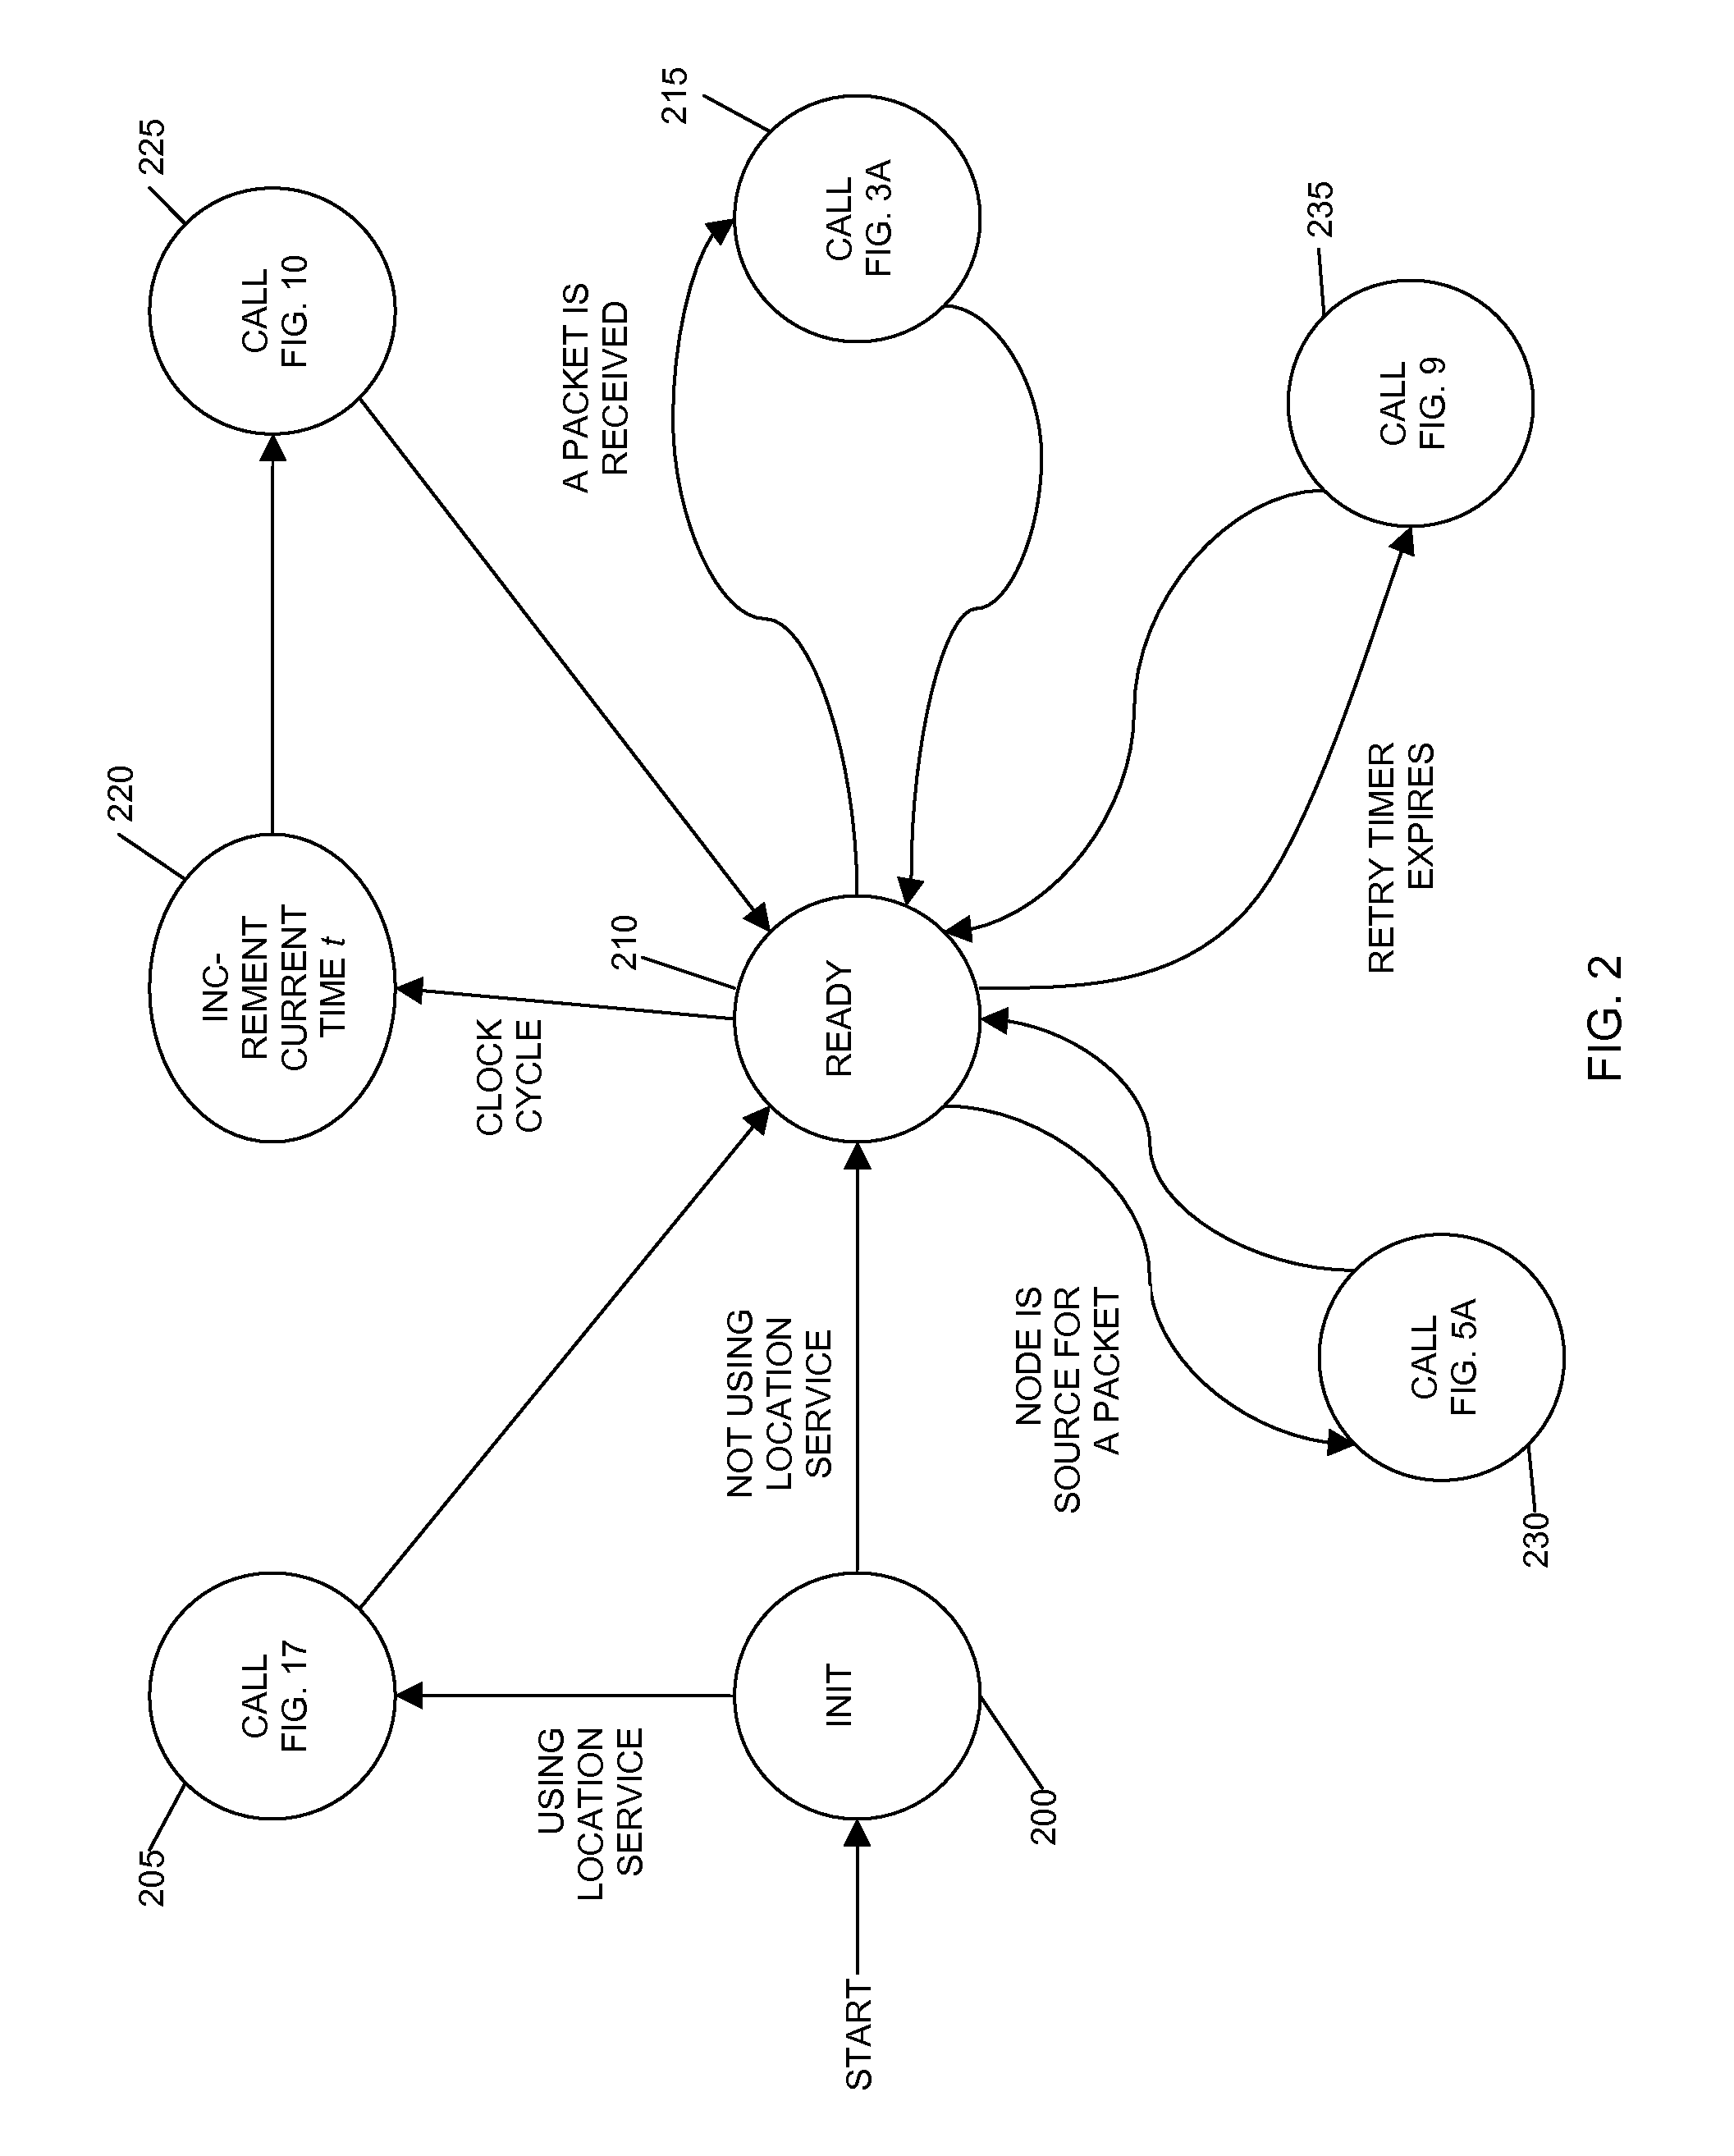 Swarm location service for mobile ad hoc network communications